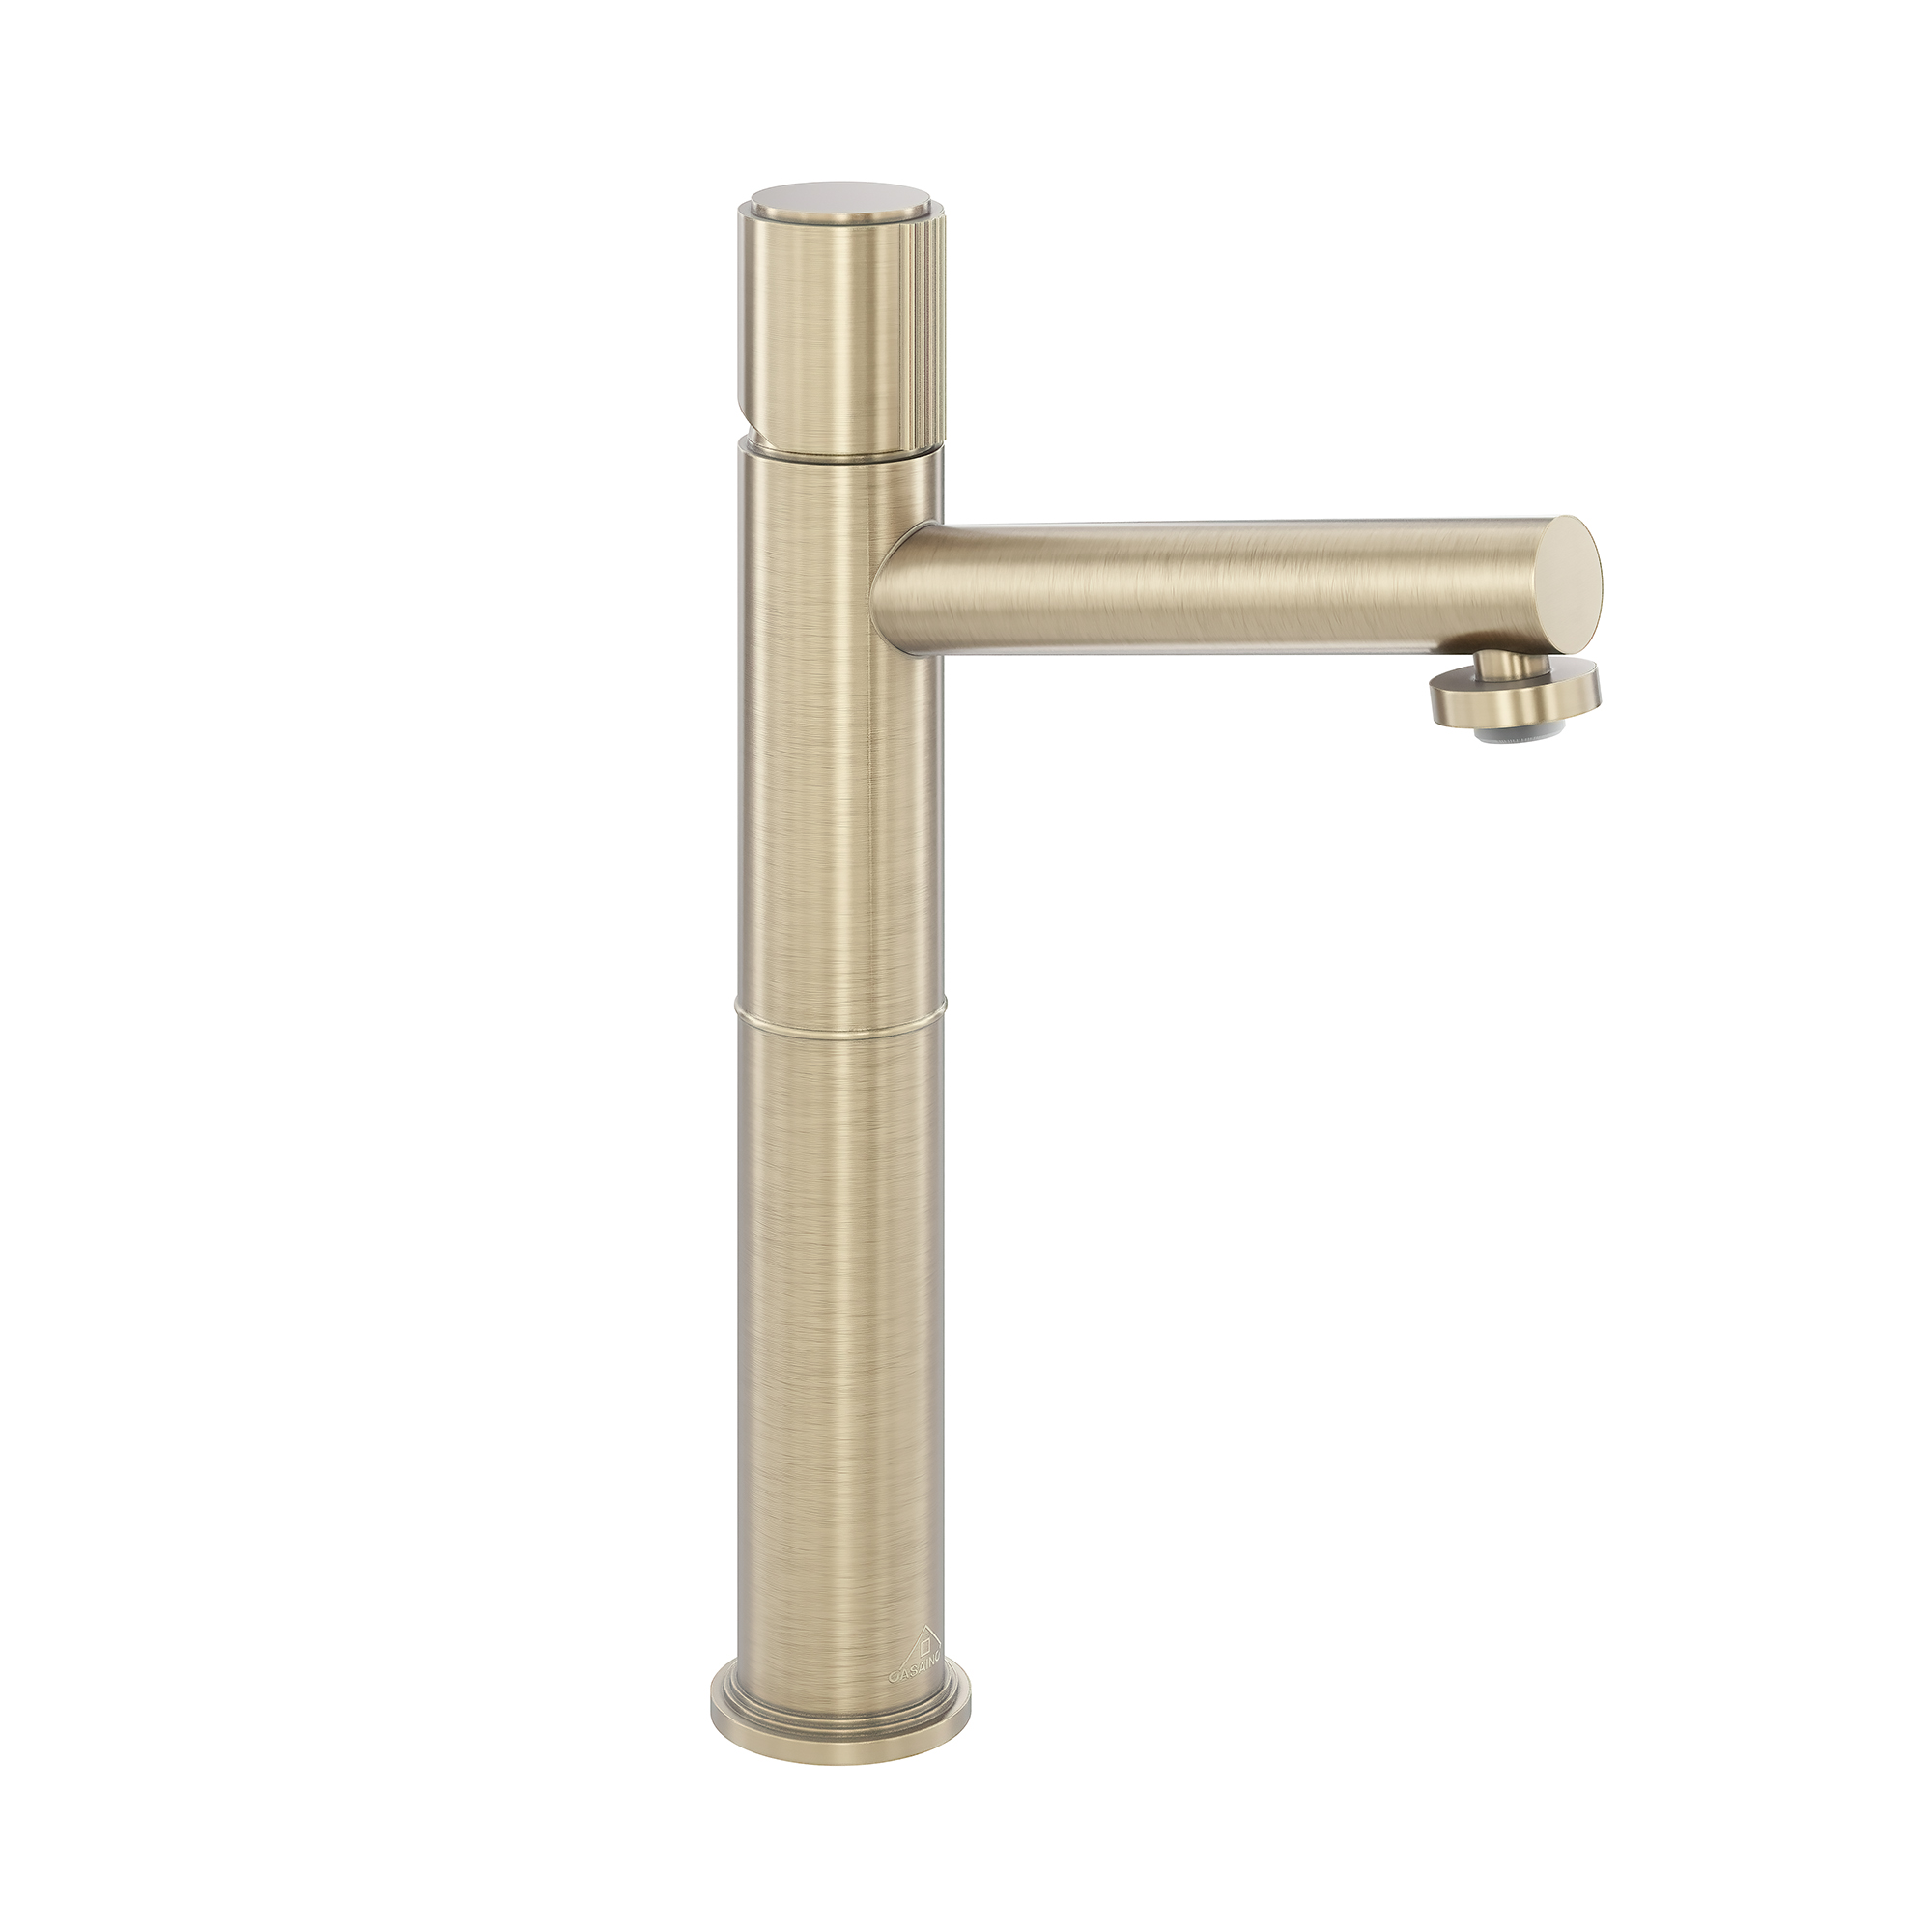 CASAINC 1.2GPM Spot-Free Single Hole Bathroom Sink Faucet with Pop-Up Drain in Brushed Champagne Gold  online source quality content